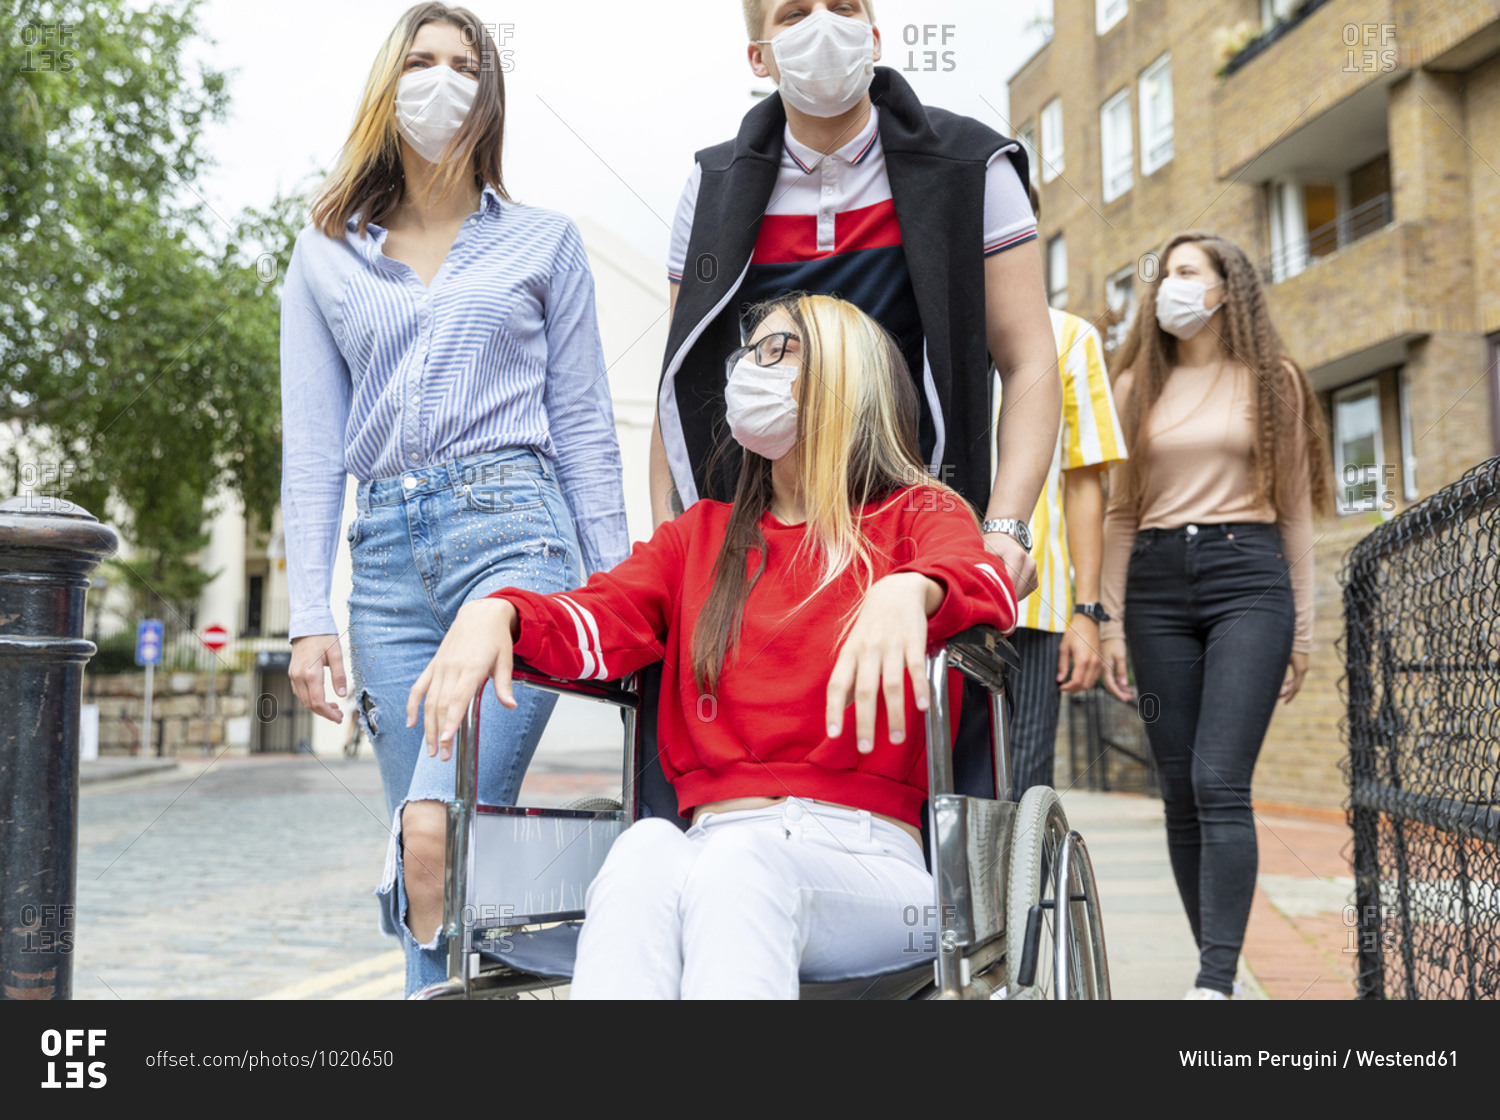 Men and women with disabled female friend wearing masks in city